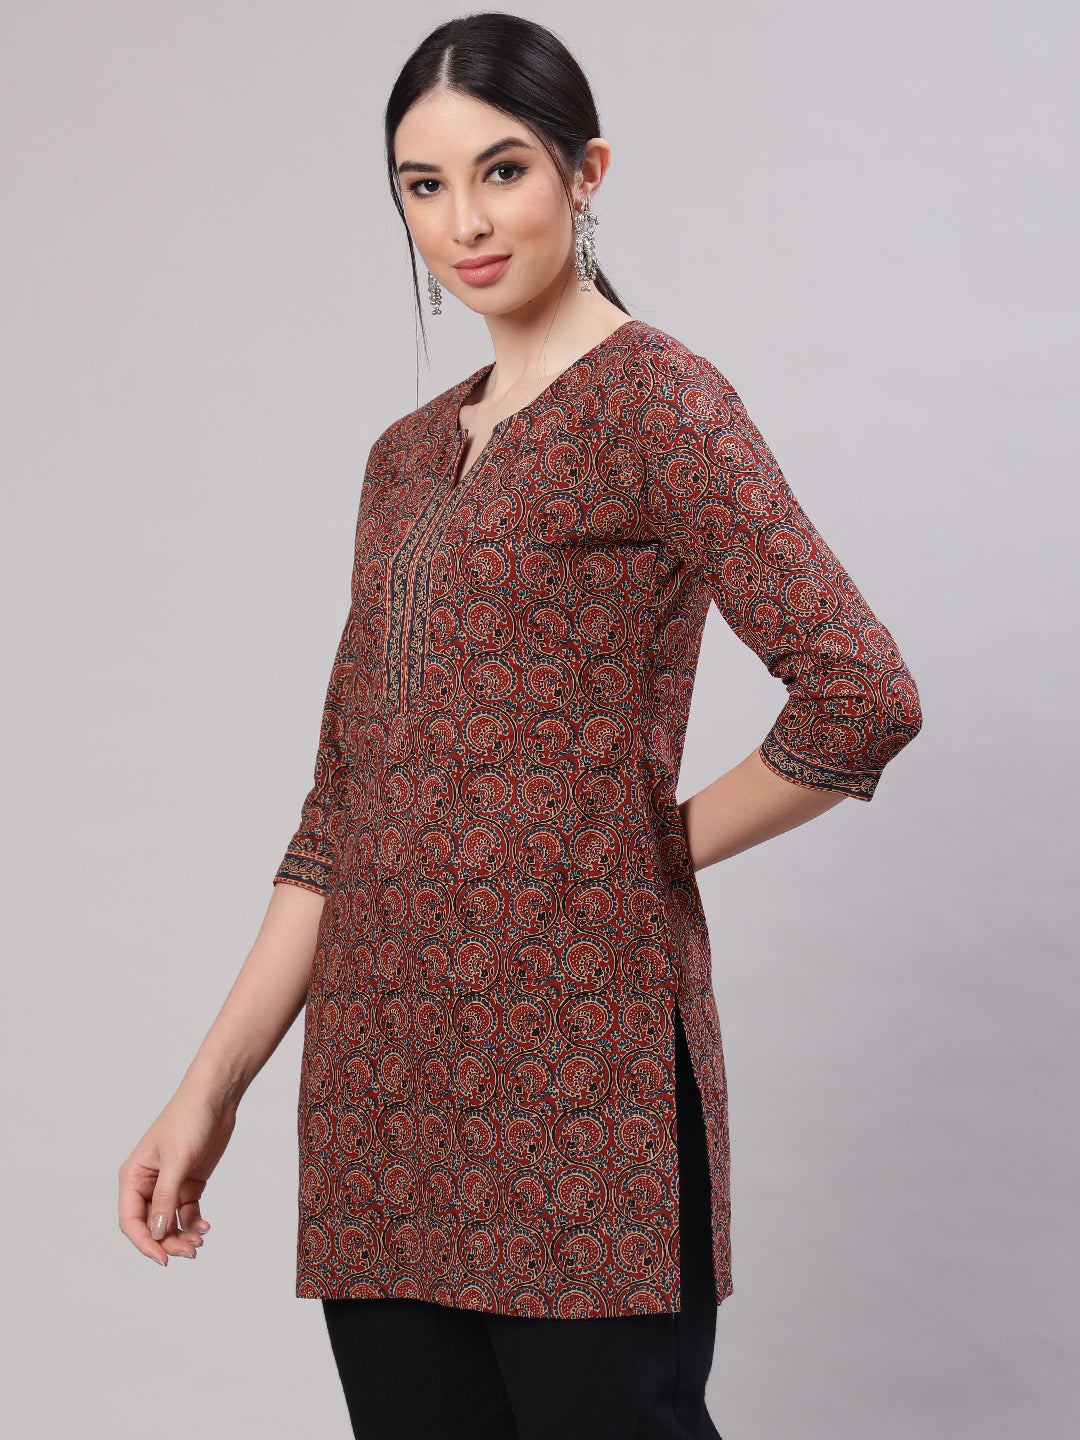 Women's Multi Color Printed Straight Tunic With Three Quarter Sleeves - Nayo Clothing